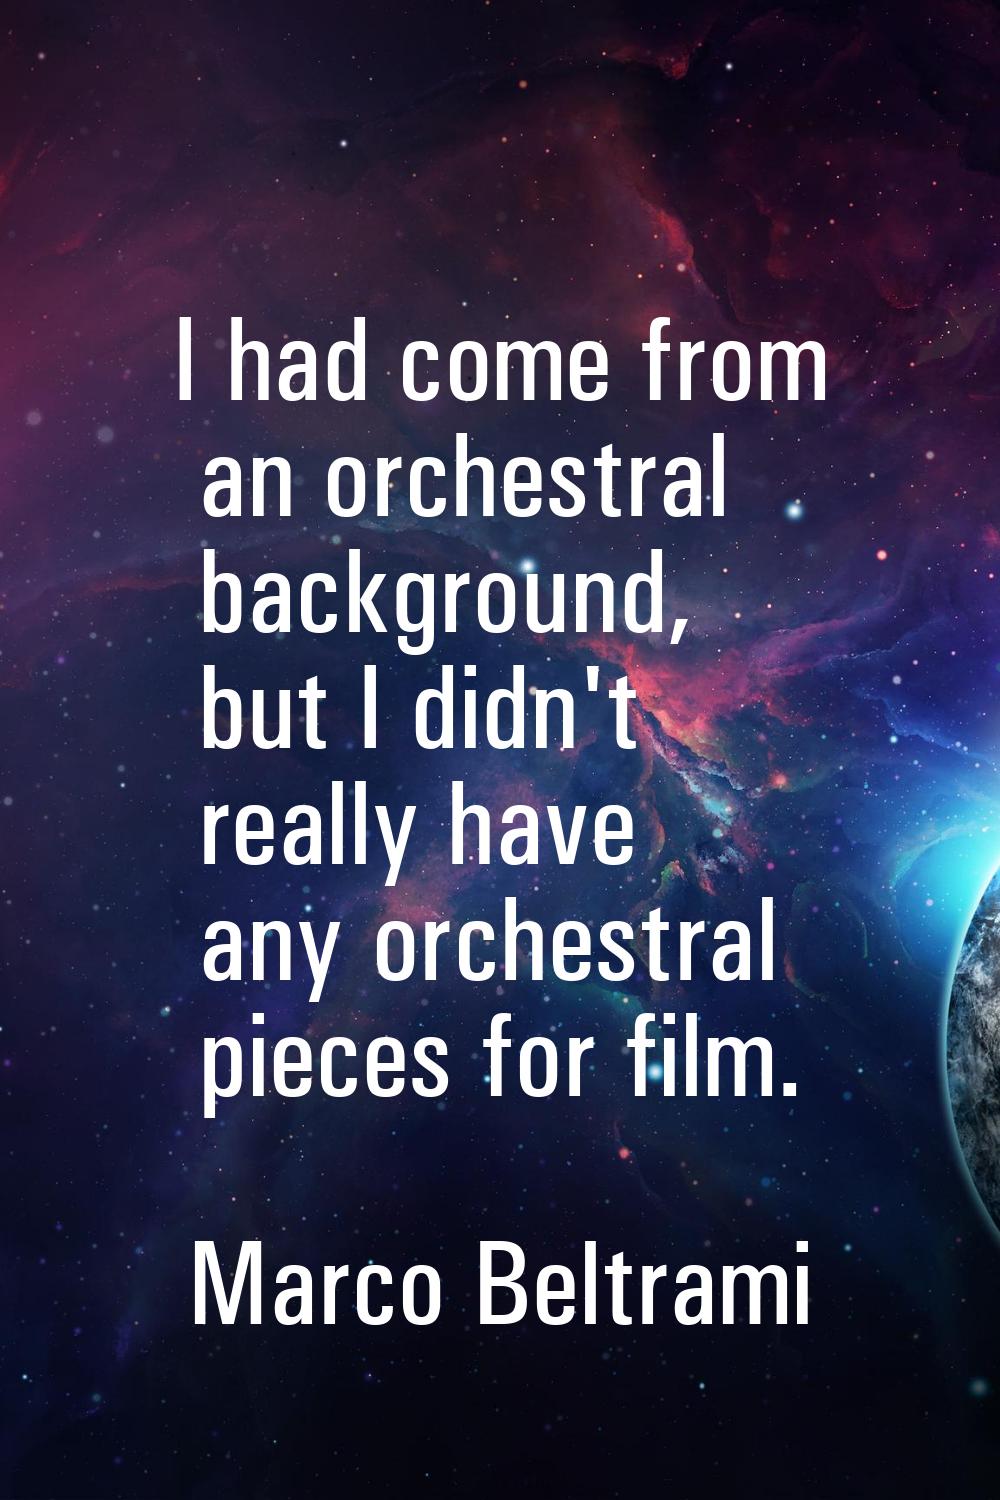 I had come from an orchestral background, but I didn't really have any orchestral pieces for film.